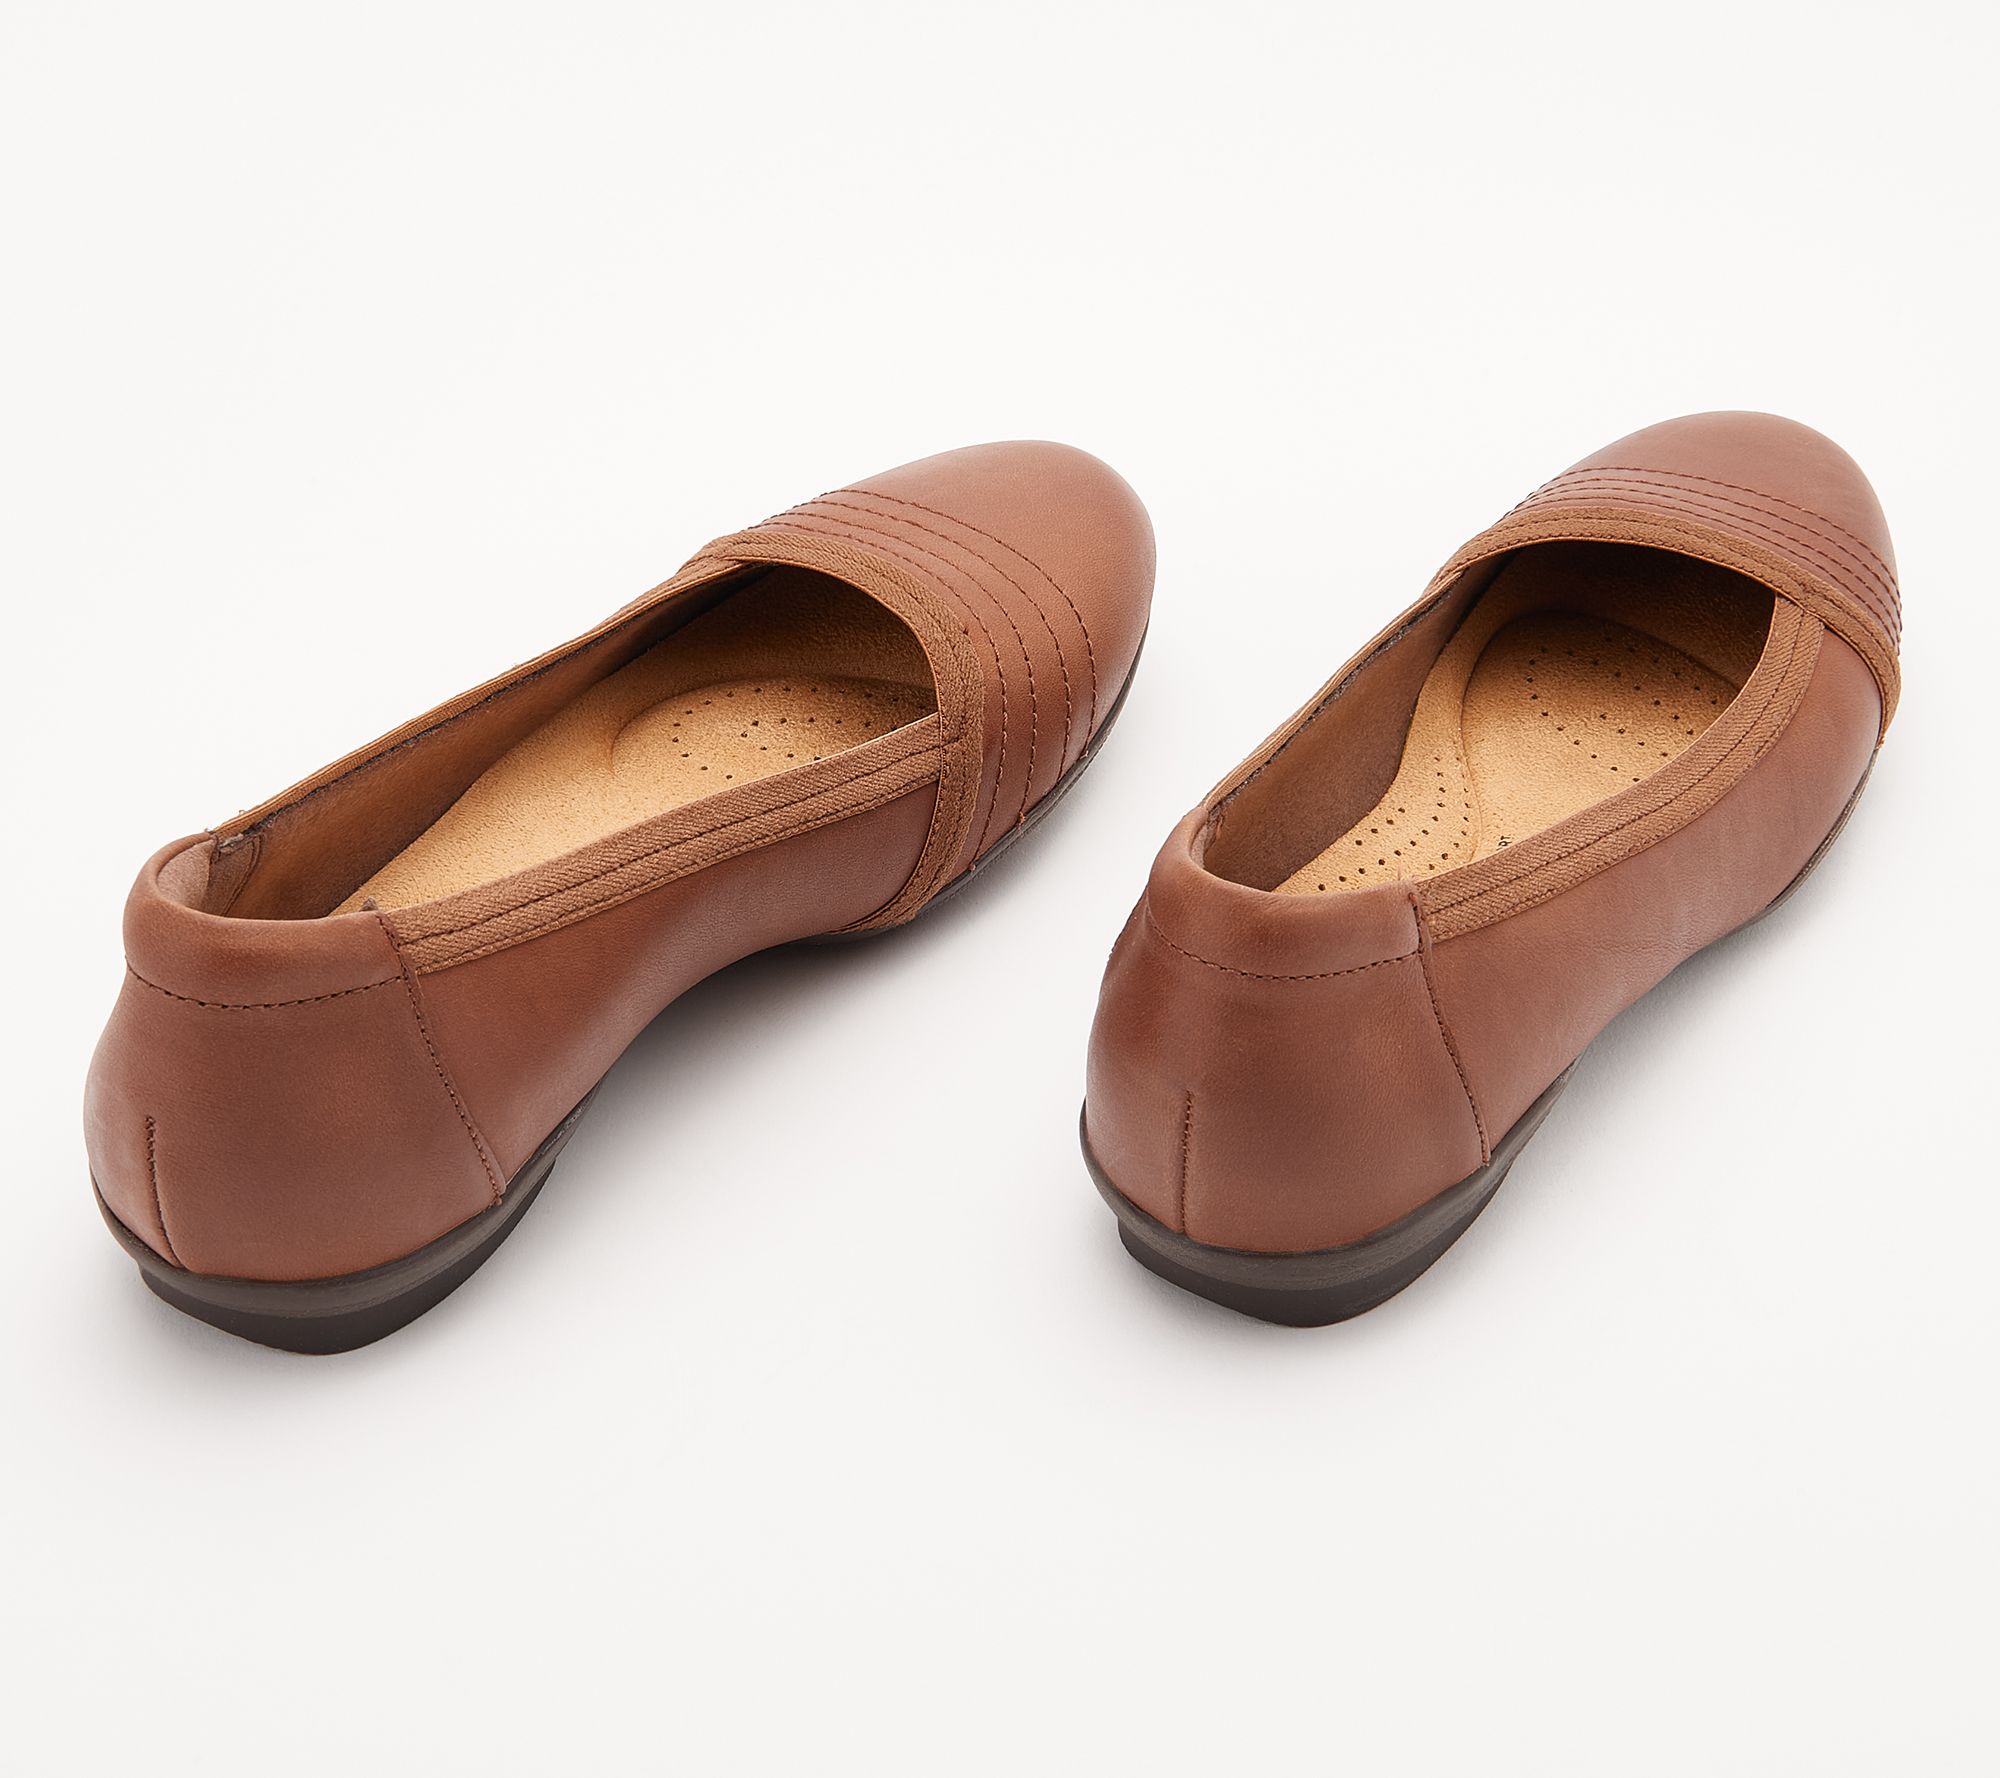 Clarks Collection Leather Ballet Flats - Sara Erin - QVC.com